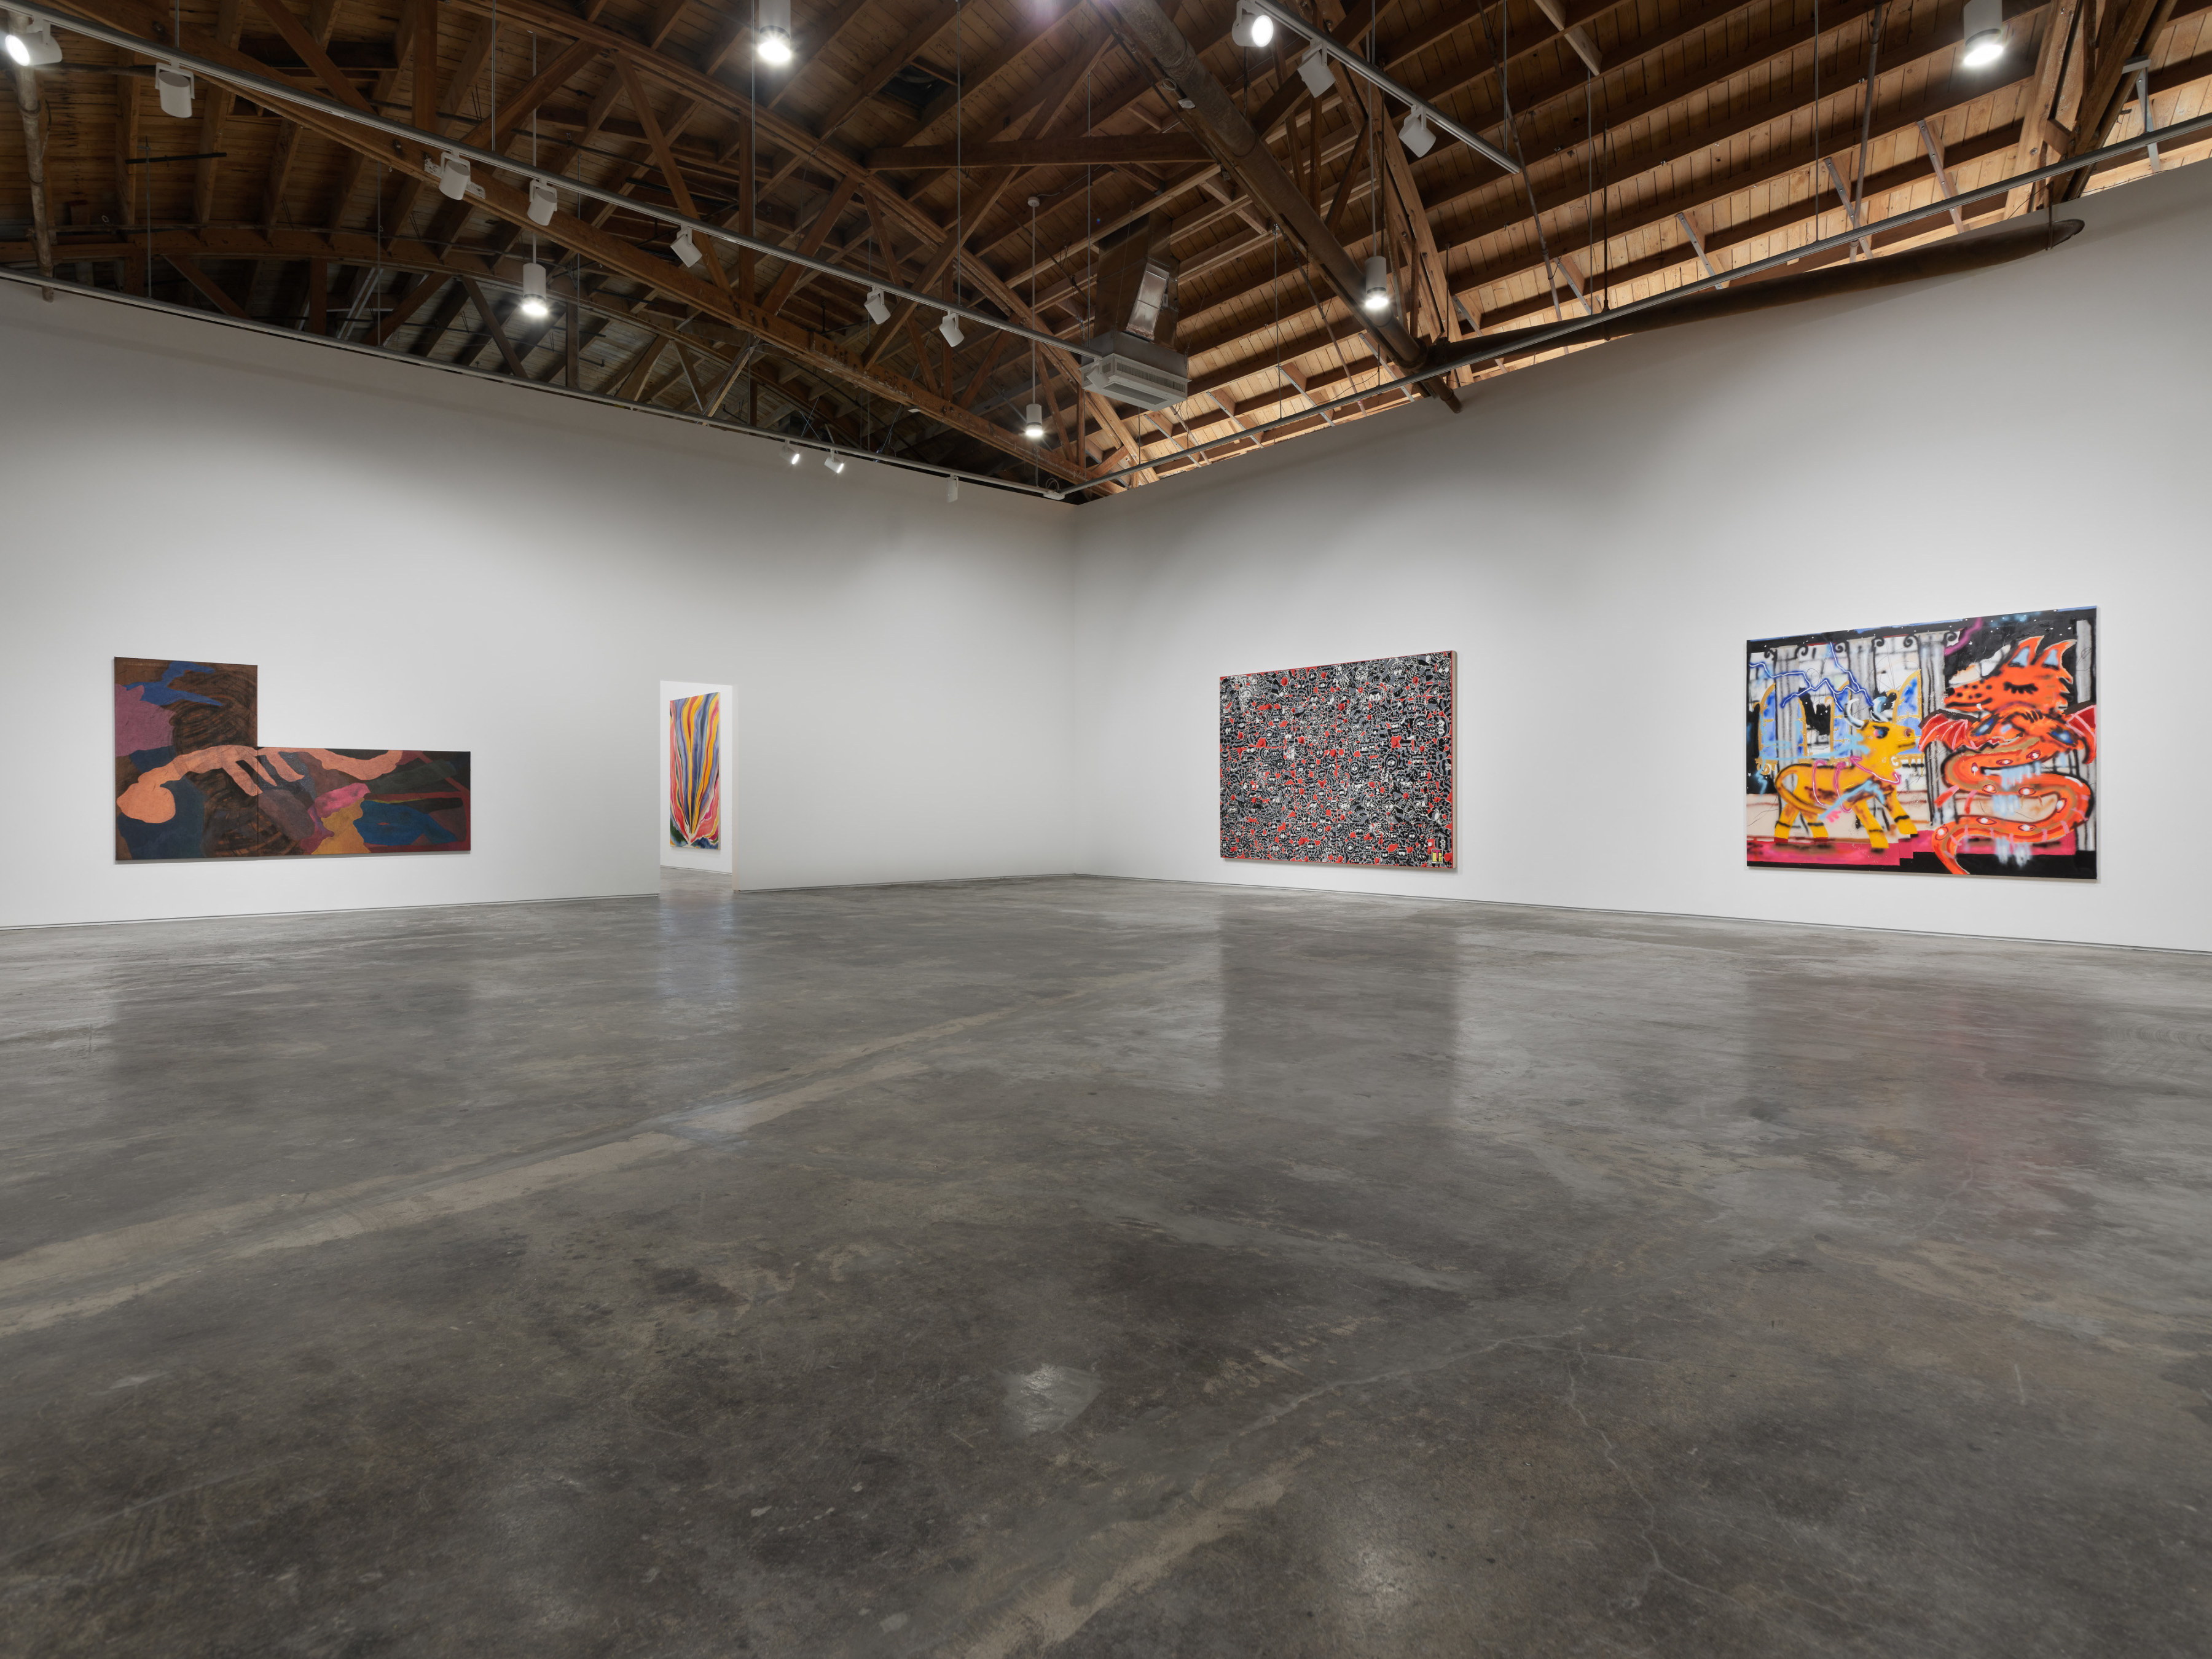 Installation view of the exhibition "The Big Picture" at Night Gallery, including a large scale painting by Kaveri Raina, Sarah Blaustein, Trenton Doyle Hancock, and Robert Nava. 